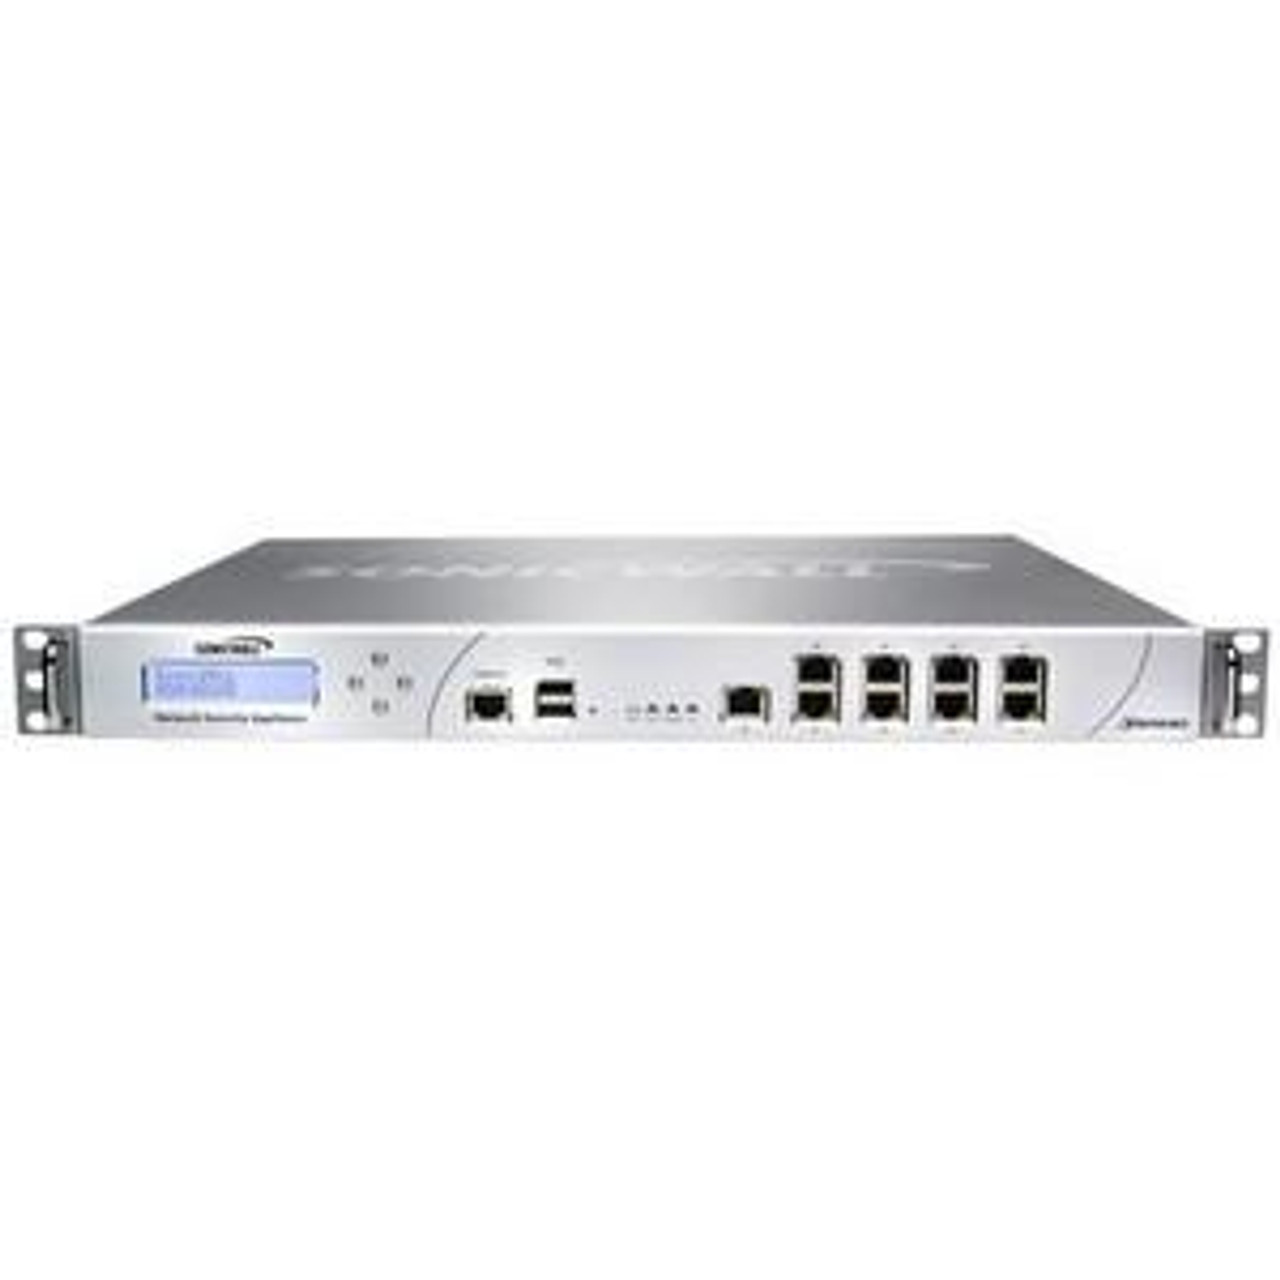 01-SSC-7004 SonicWALL NSA E6500 Network Security Appliance 8 x 10/100/1000Base-T (Refurbished)